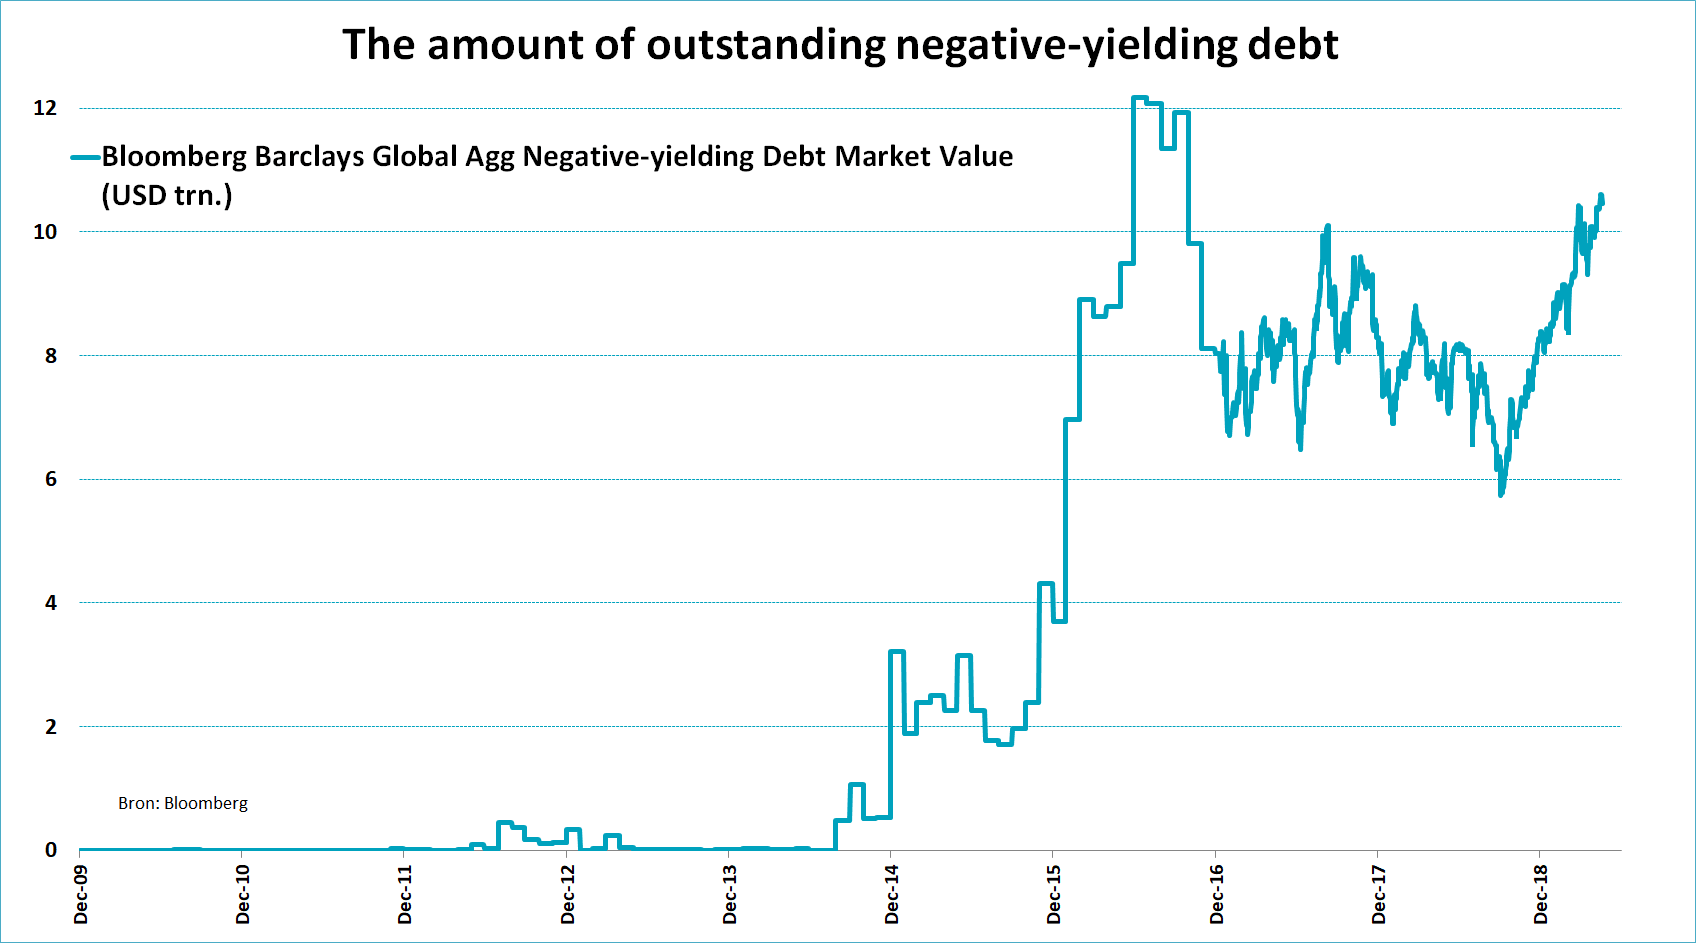 The Amount of Outstanding Negative-Yielding Debt since 2009